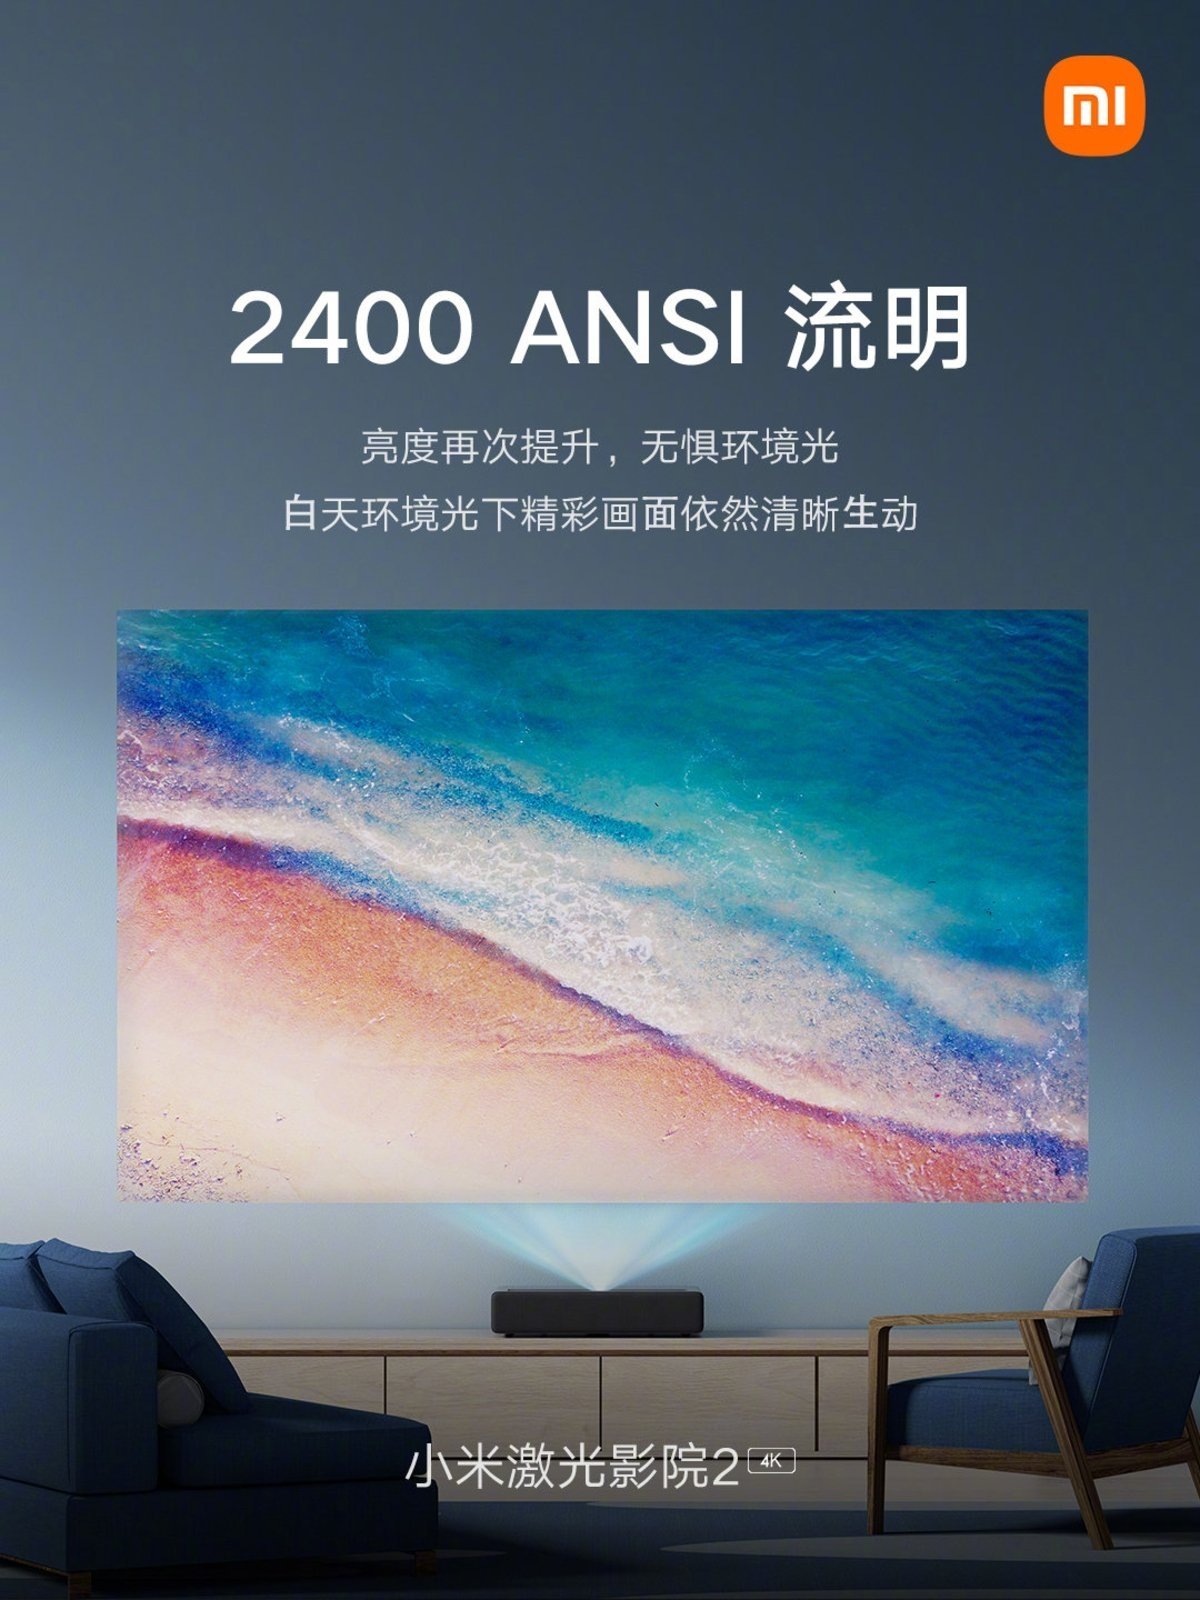 Xiaomi offers the world's first laser projector compatible with Dolby Vision